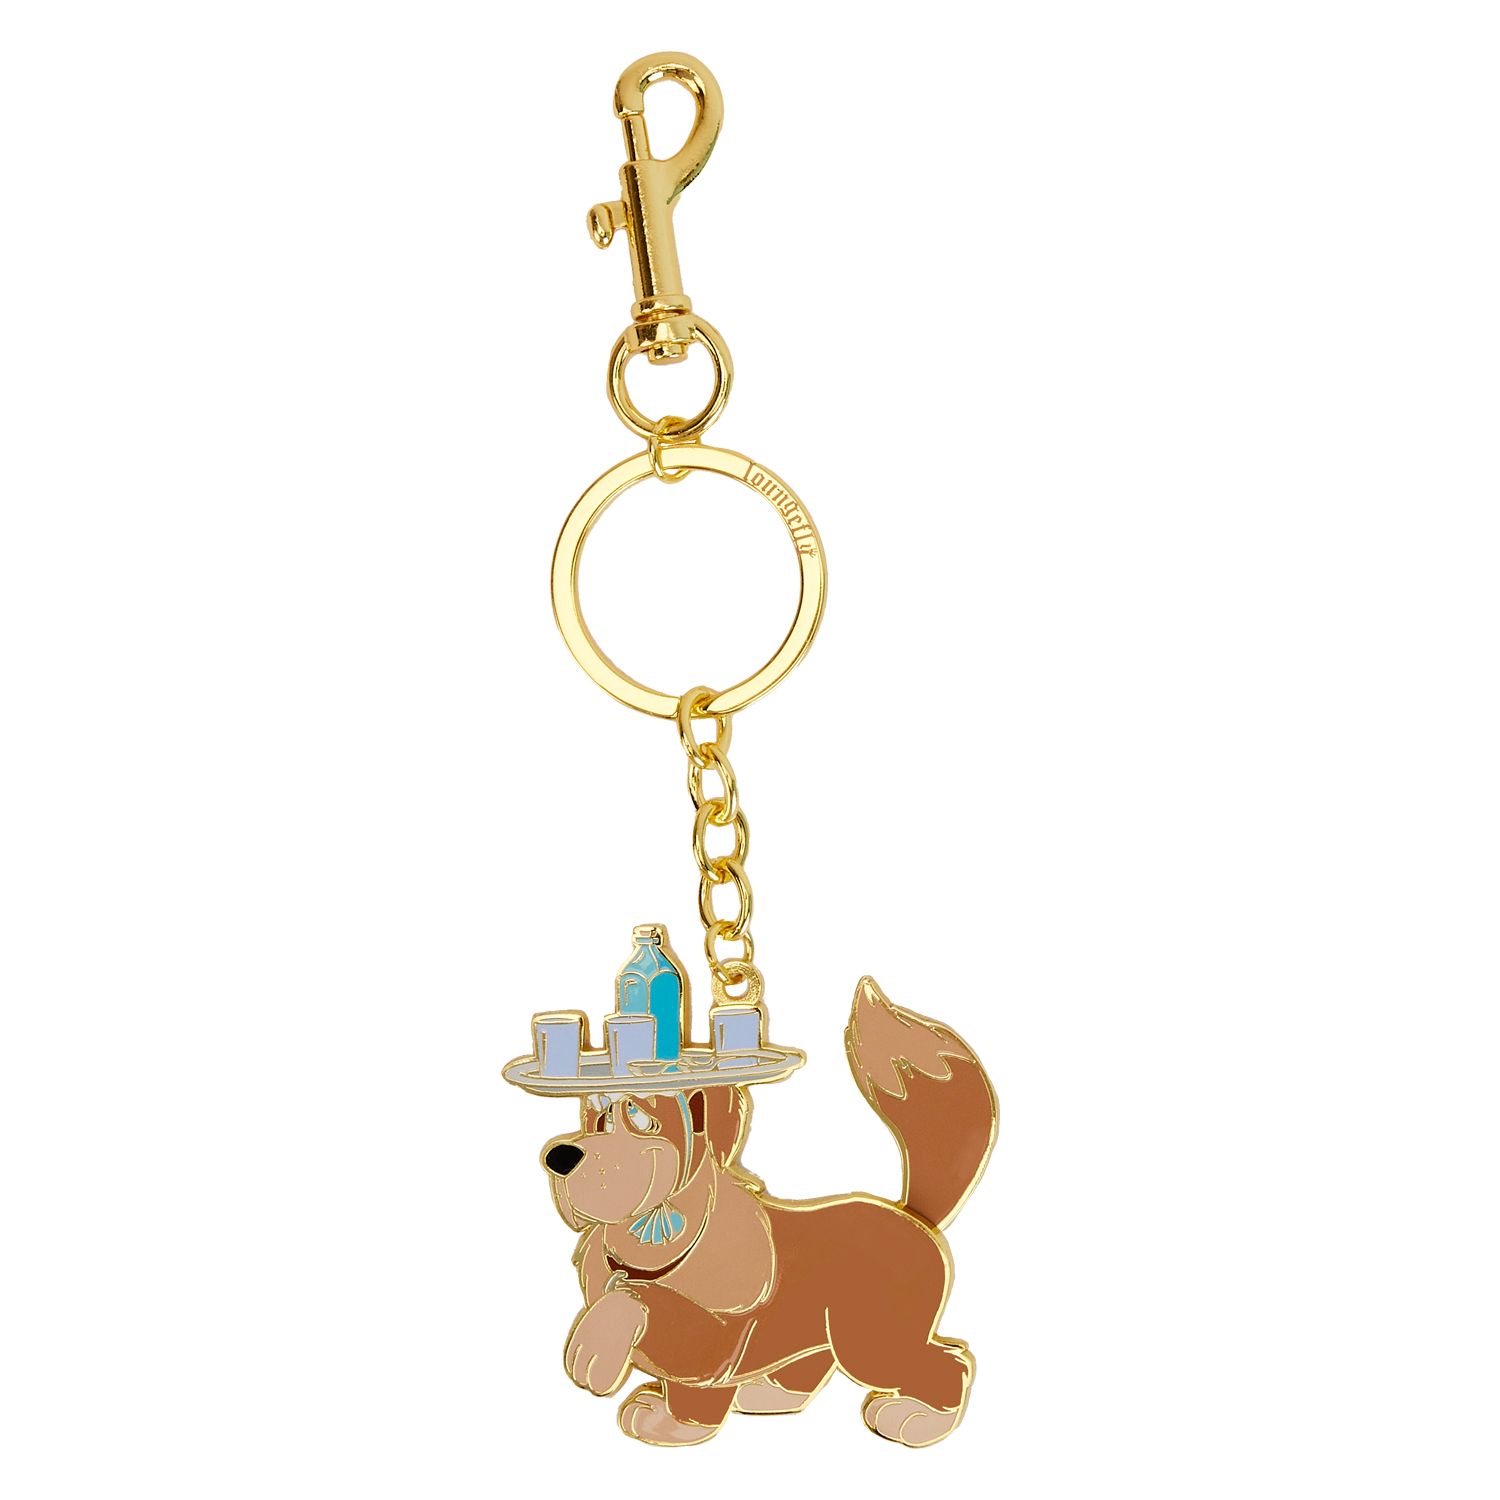 peter pan nana keychain loungefly collection